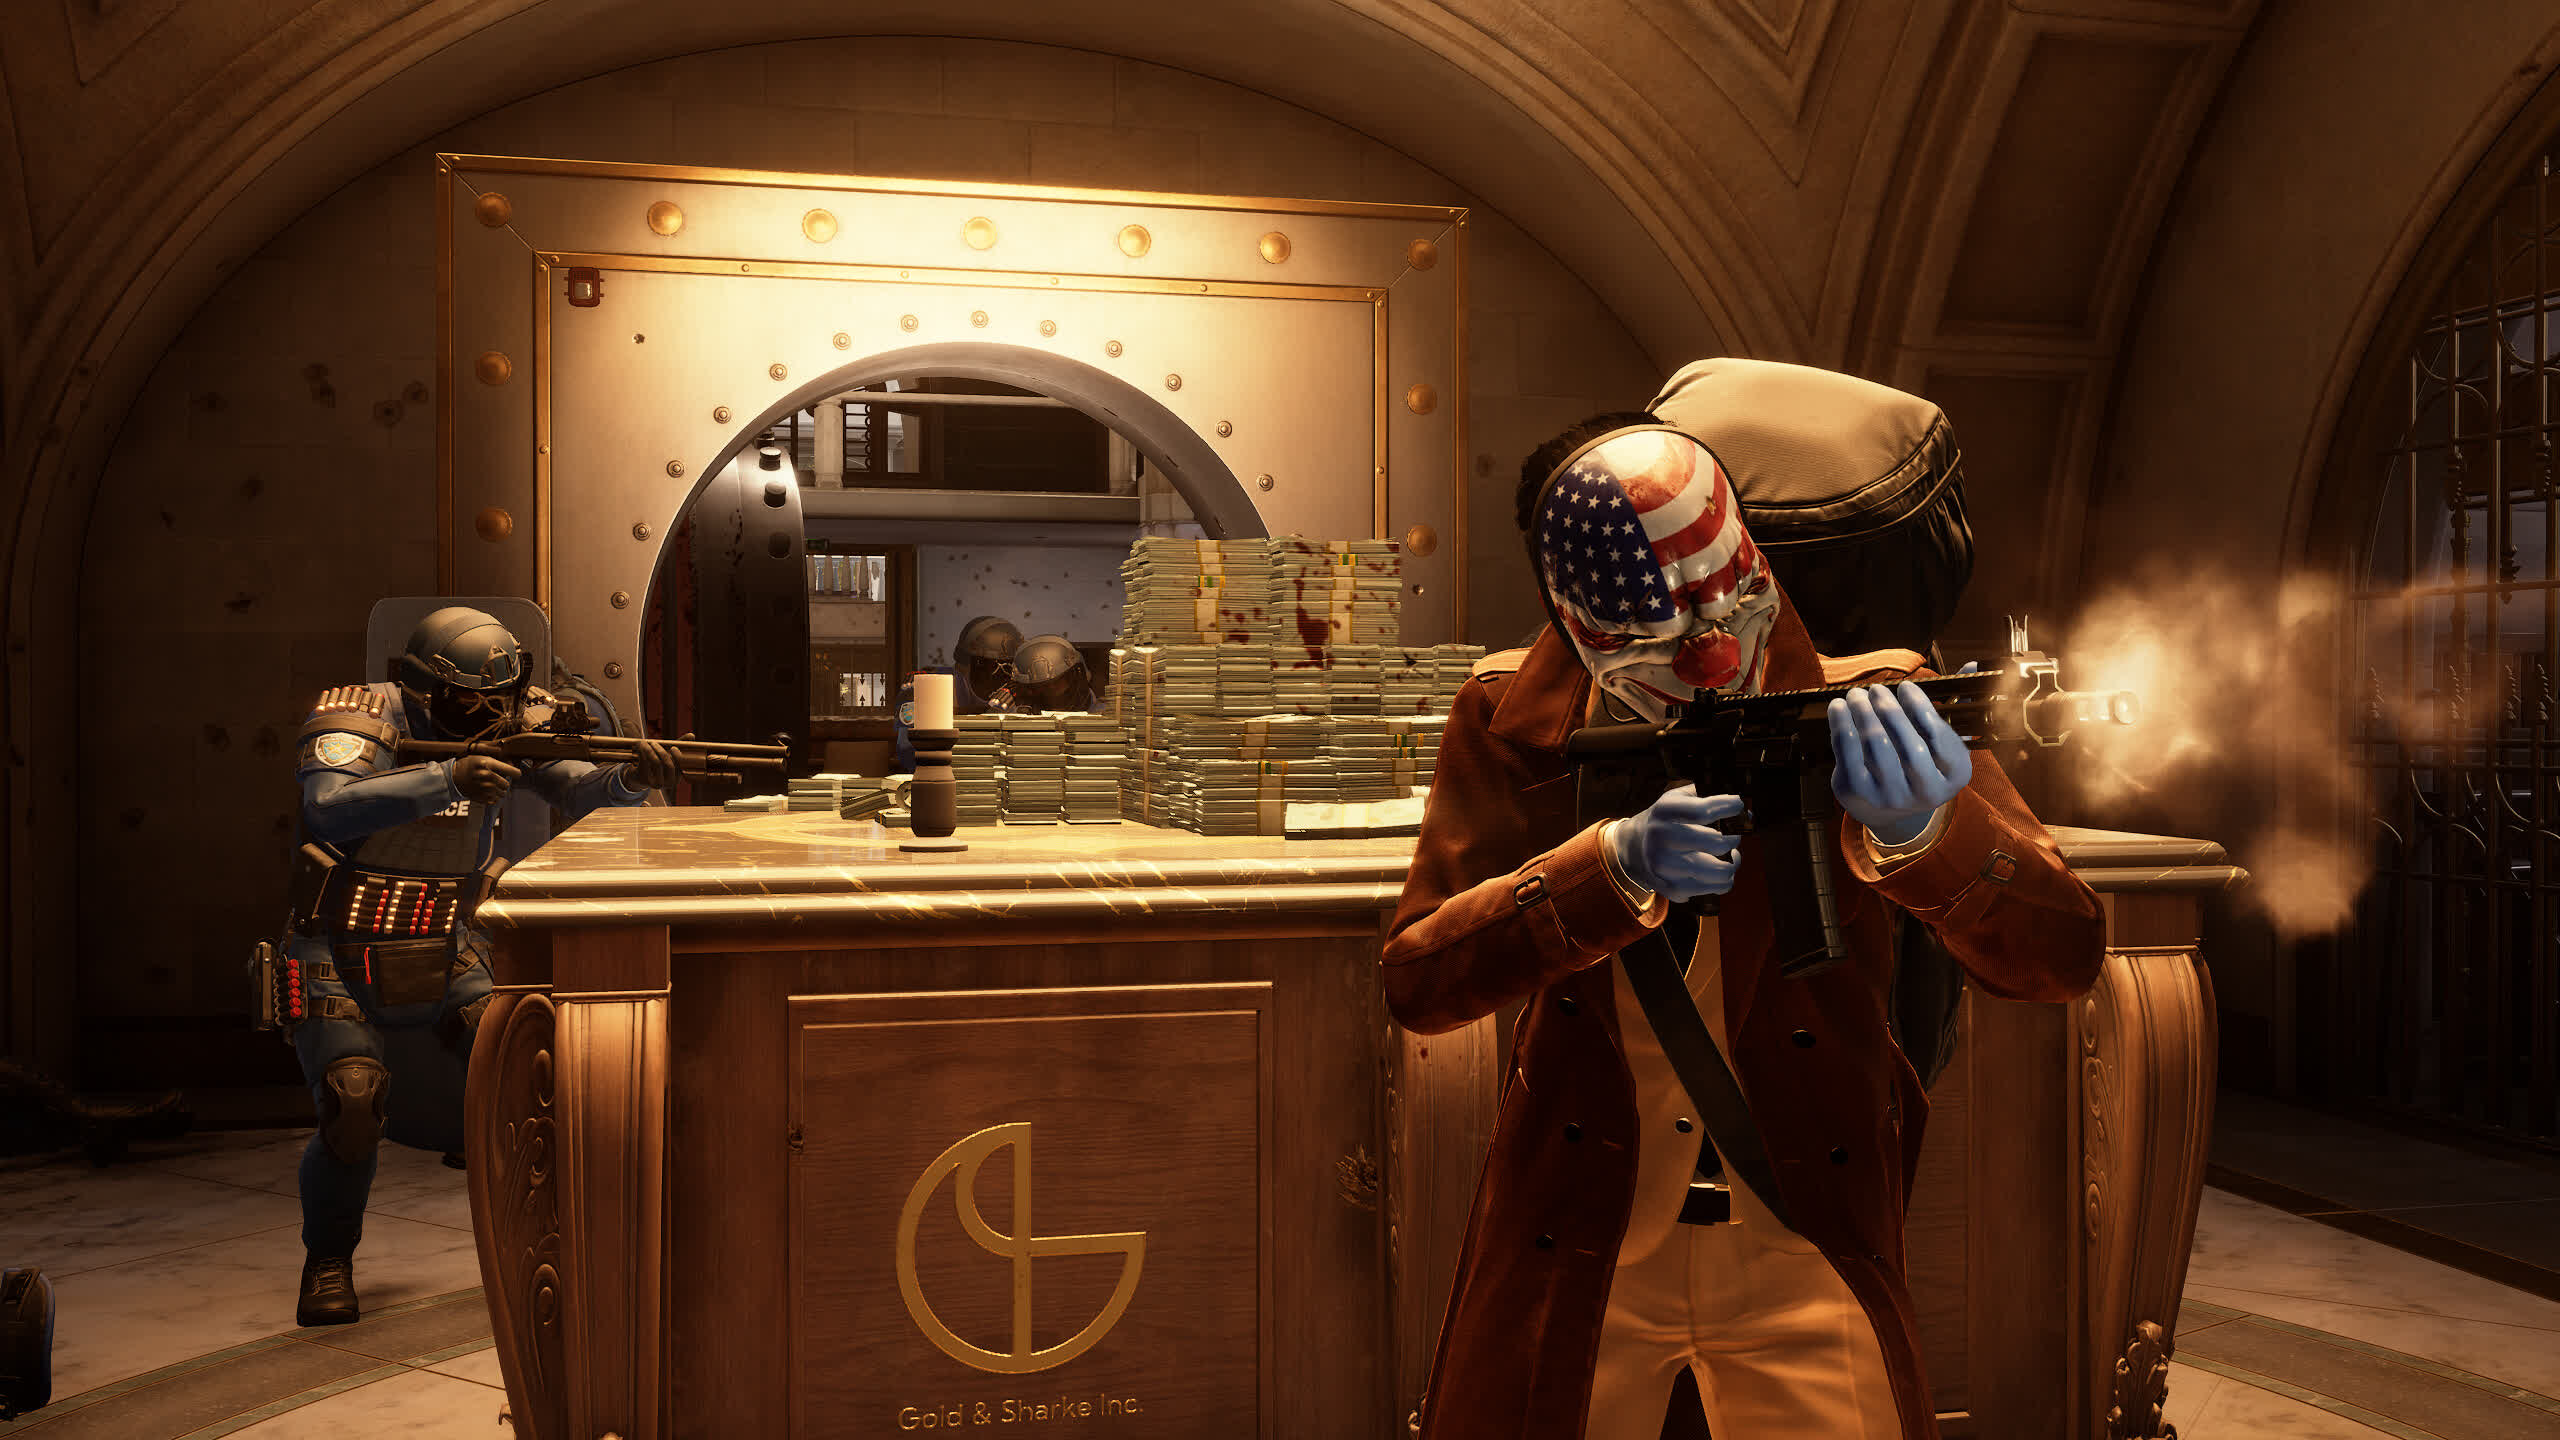 Payday 3 launches in September, and here's what you'll need to run it